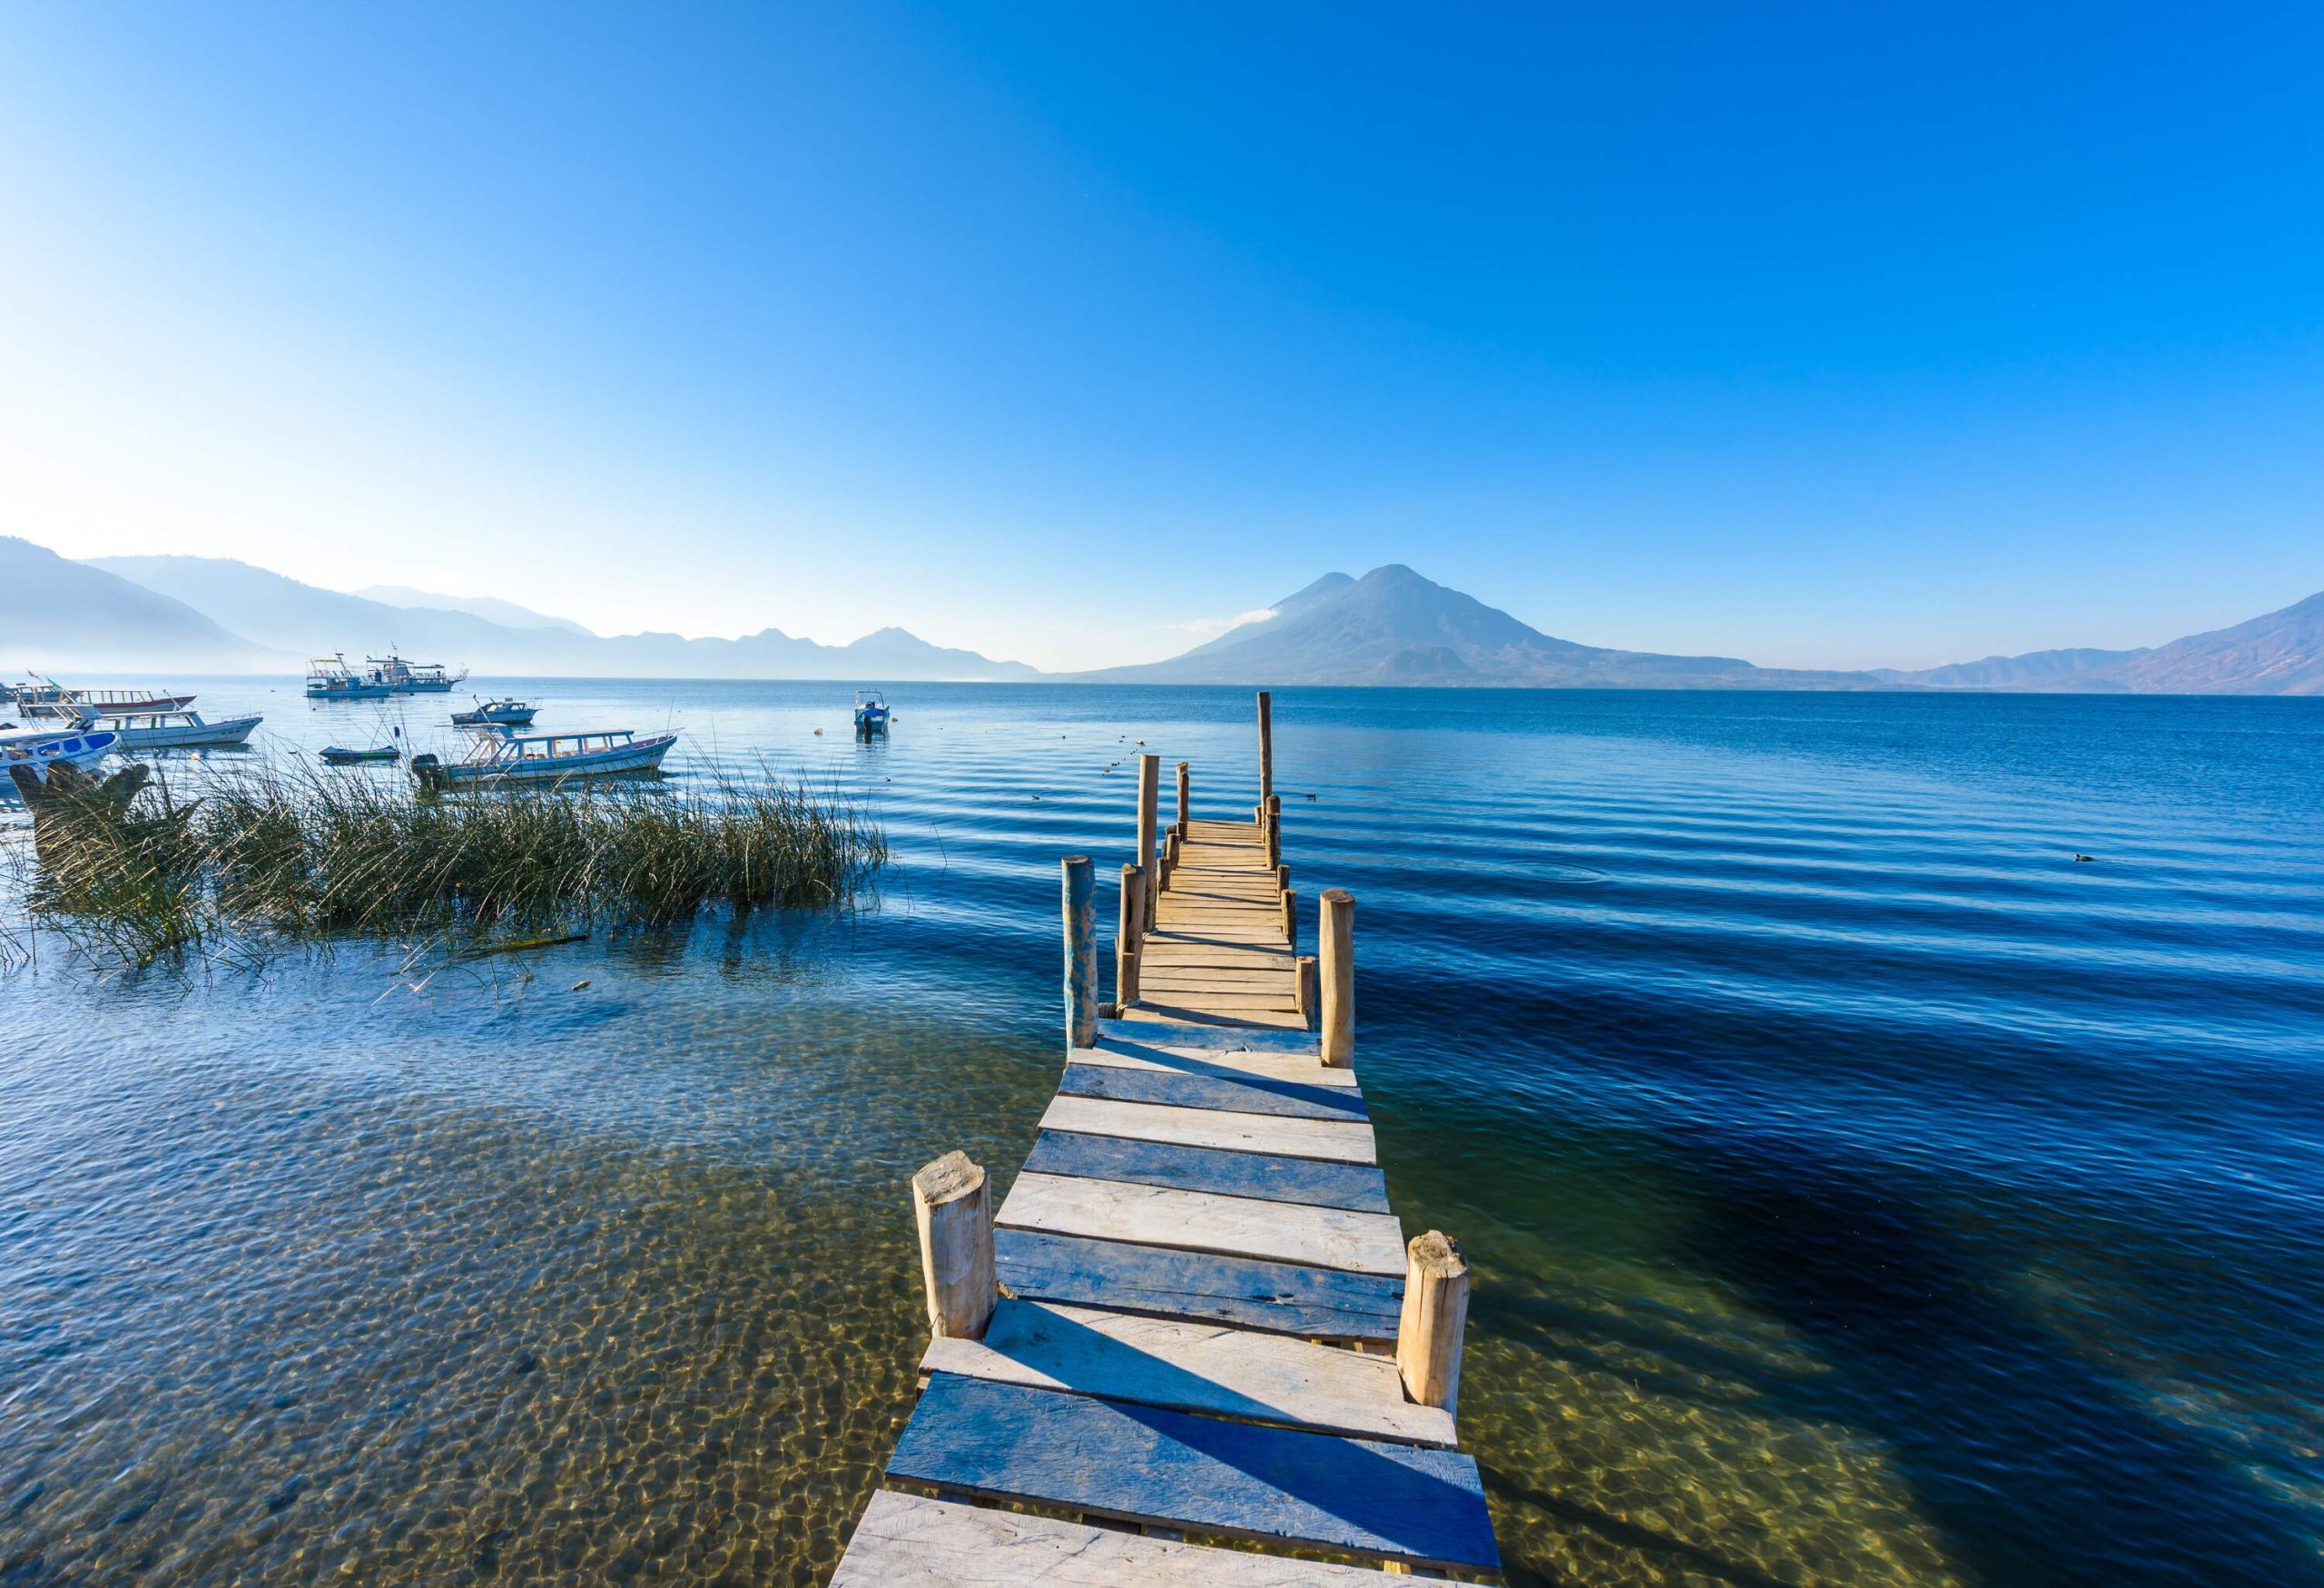 A wooden walkway runs directly over the clear lake, where boats are moored and a cone-shaped volcano may be seen in the distance.